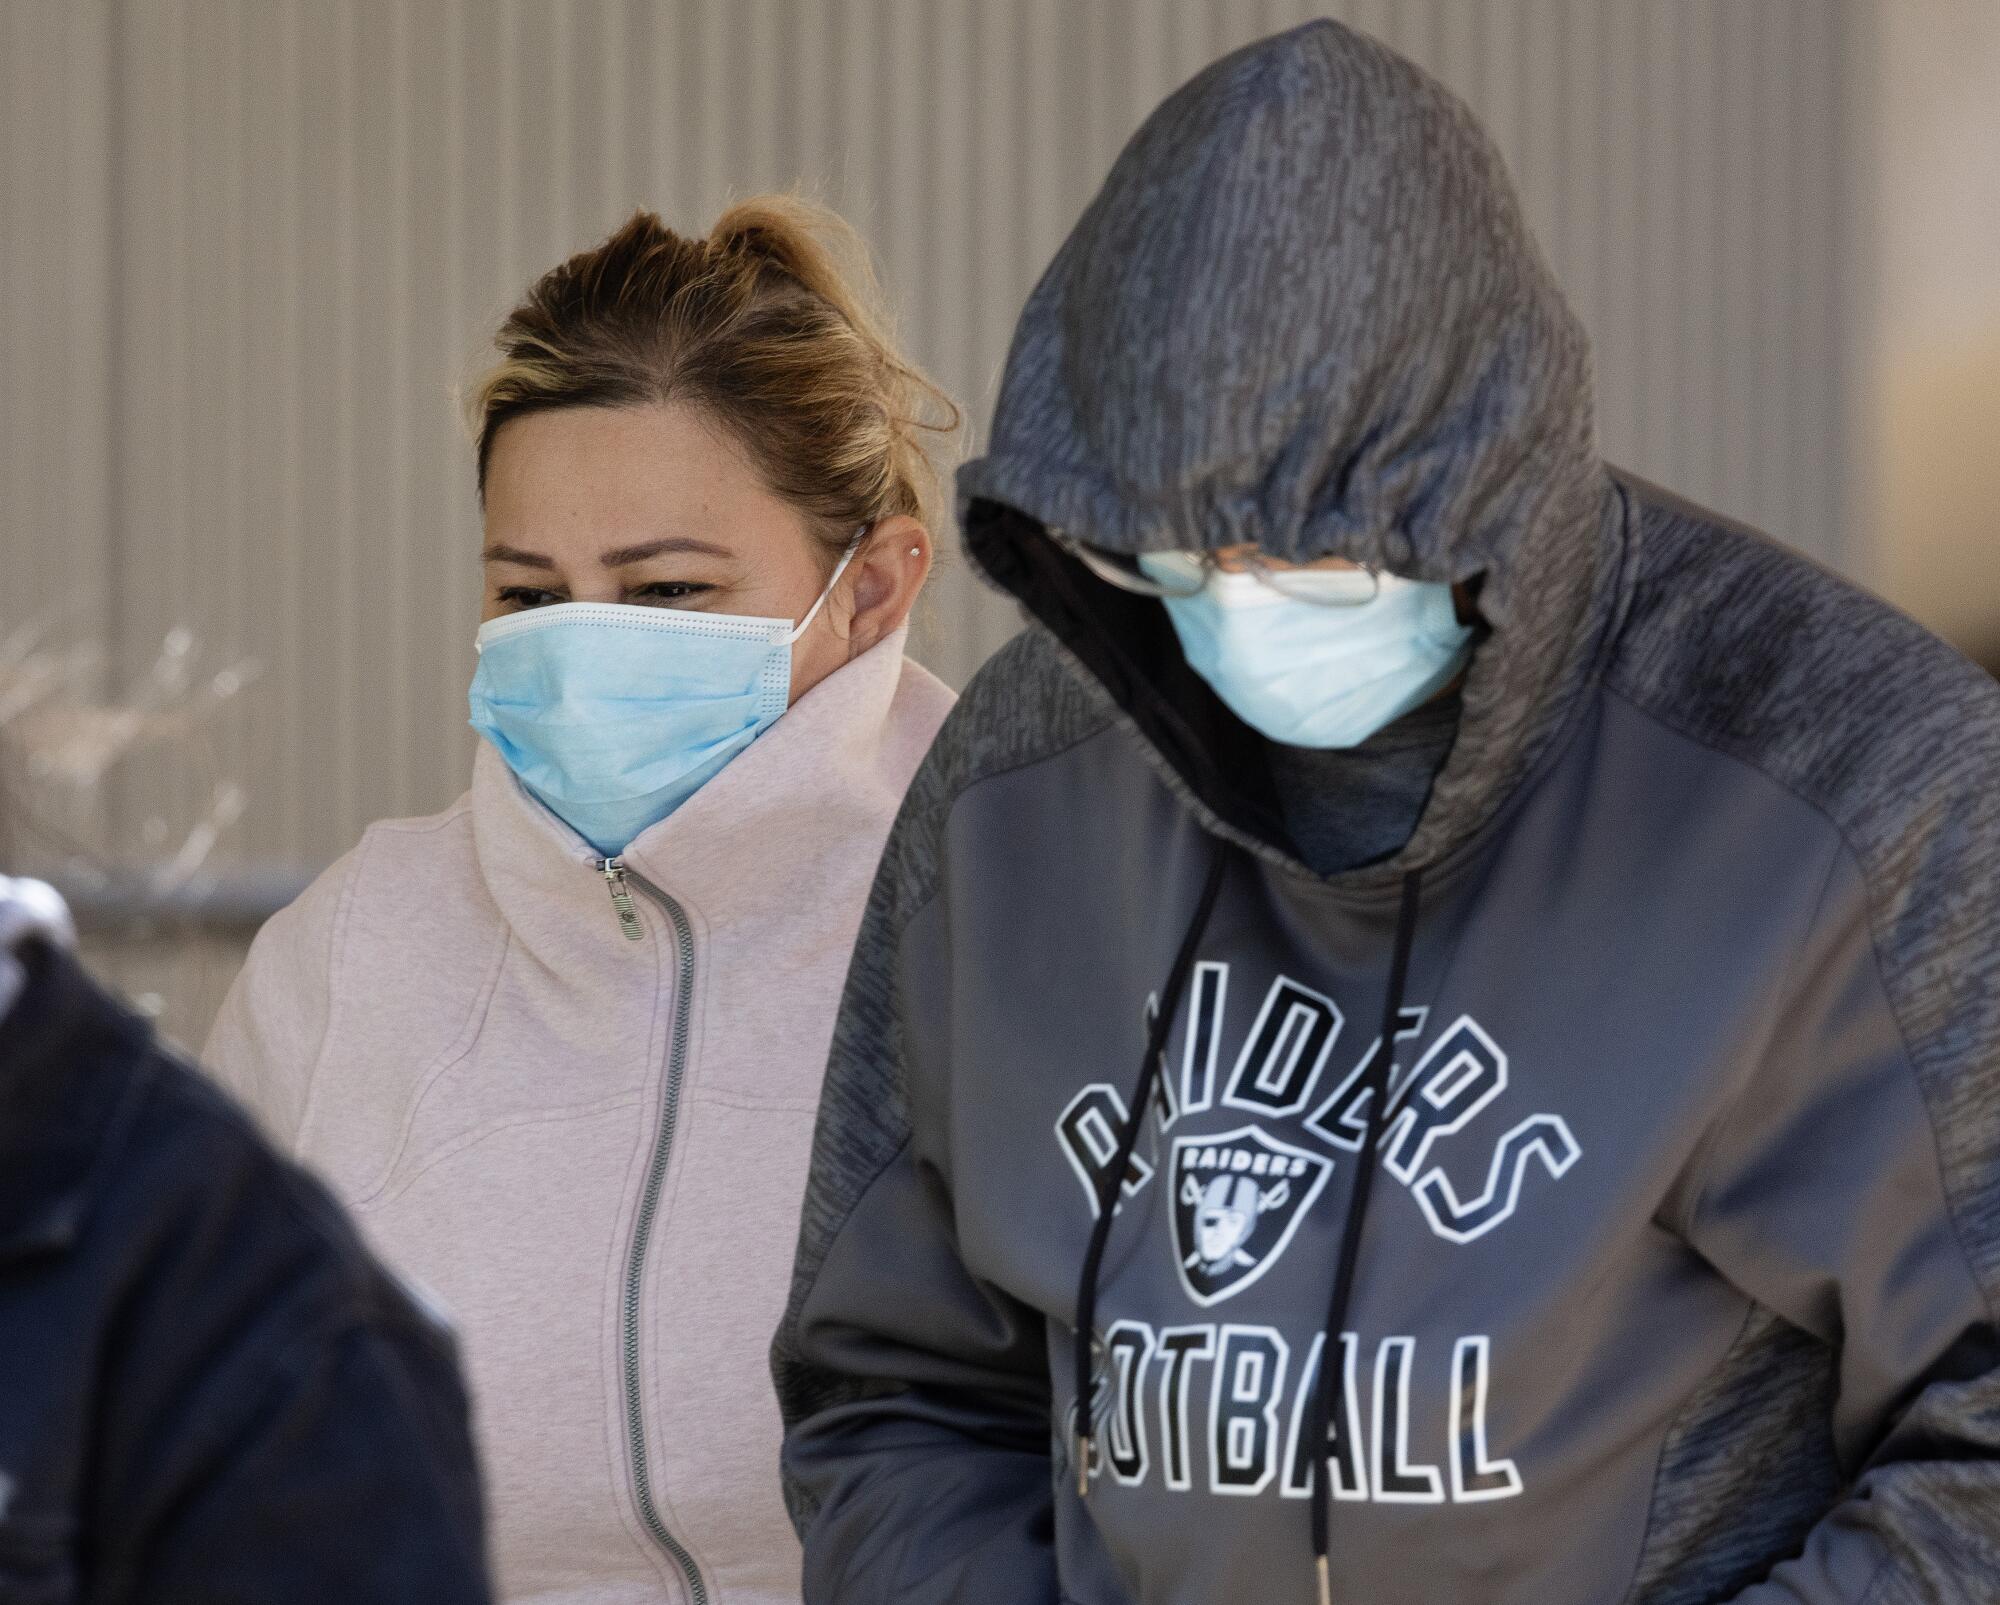 Two people in protective masks walking, one with her collar upturned and one with a Raiders sweatshirt hood over their head